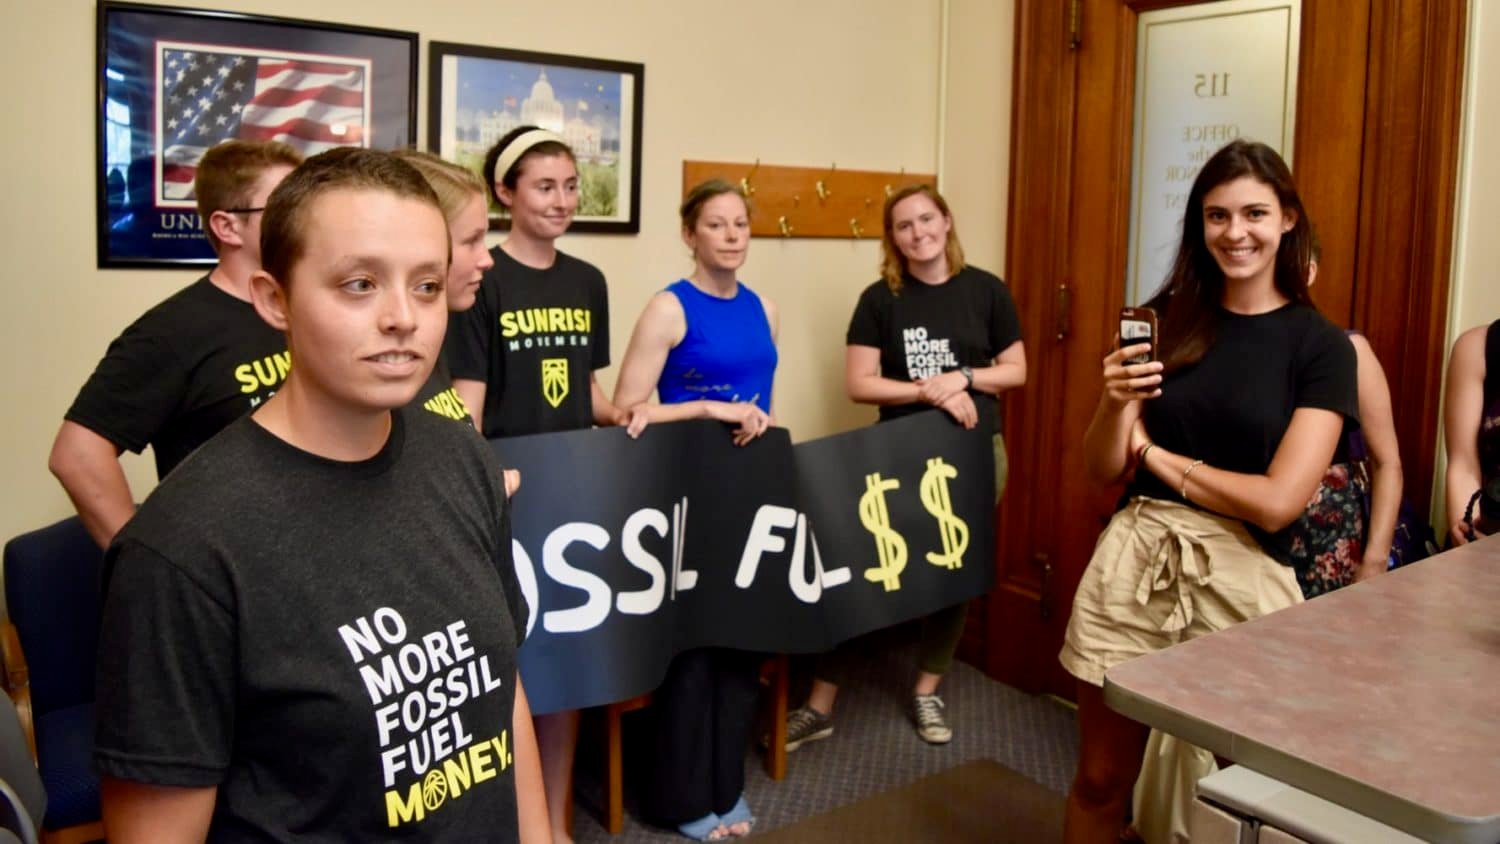 Sunrise Movement once again asks Governor Raimondo to refuse fossil fuel campaign funds